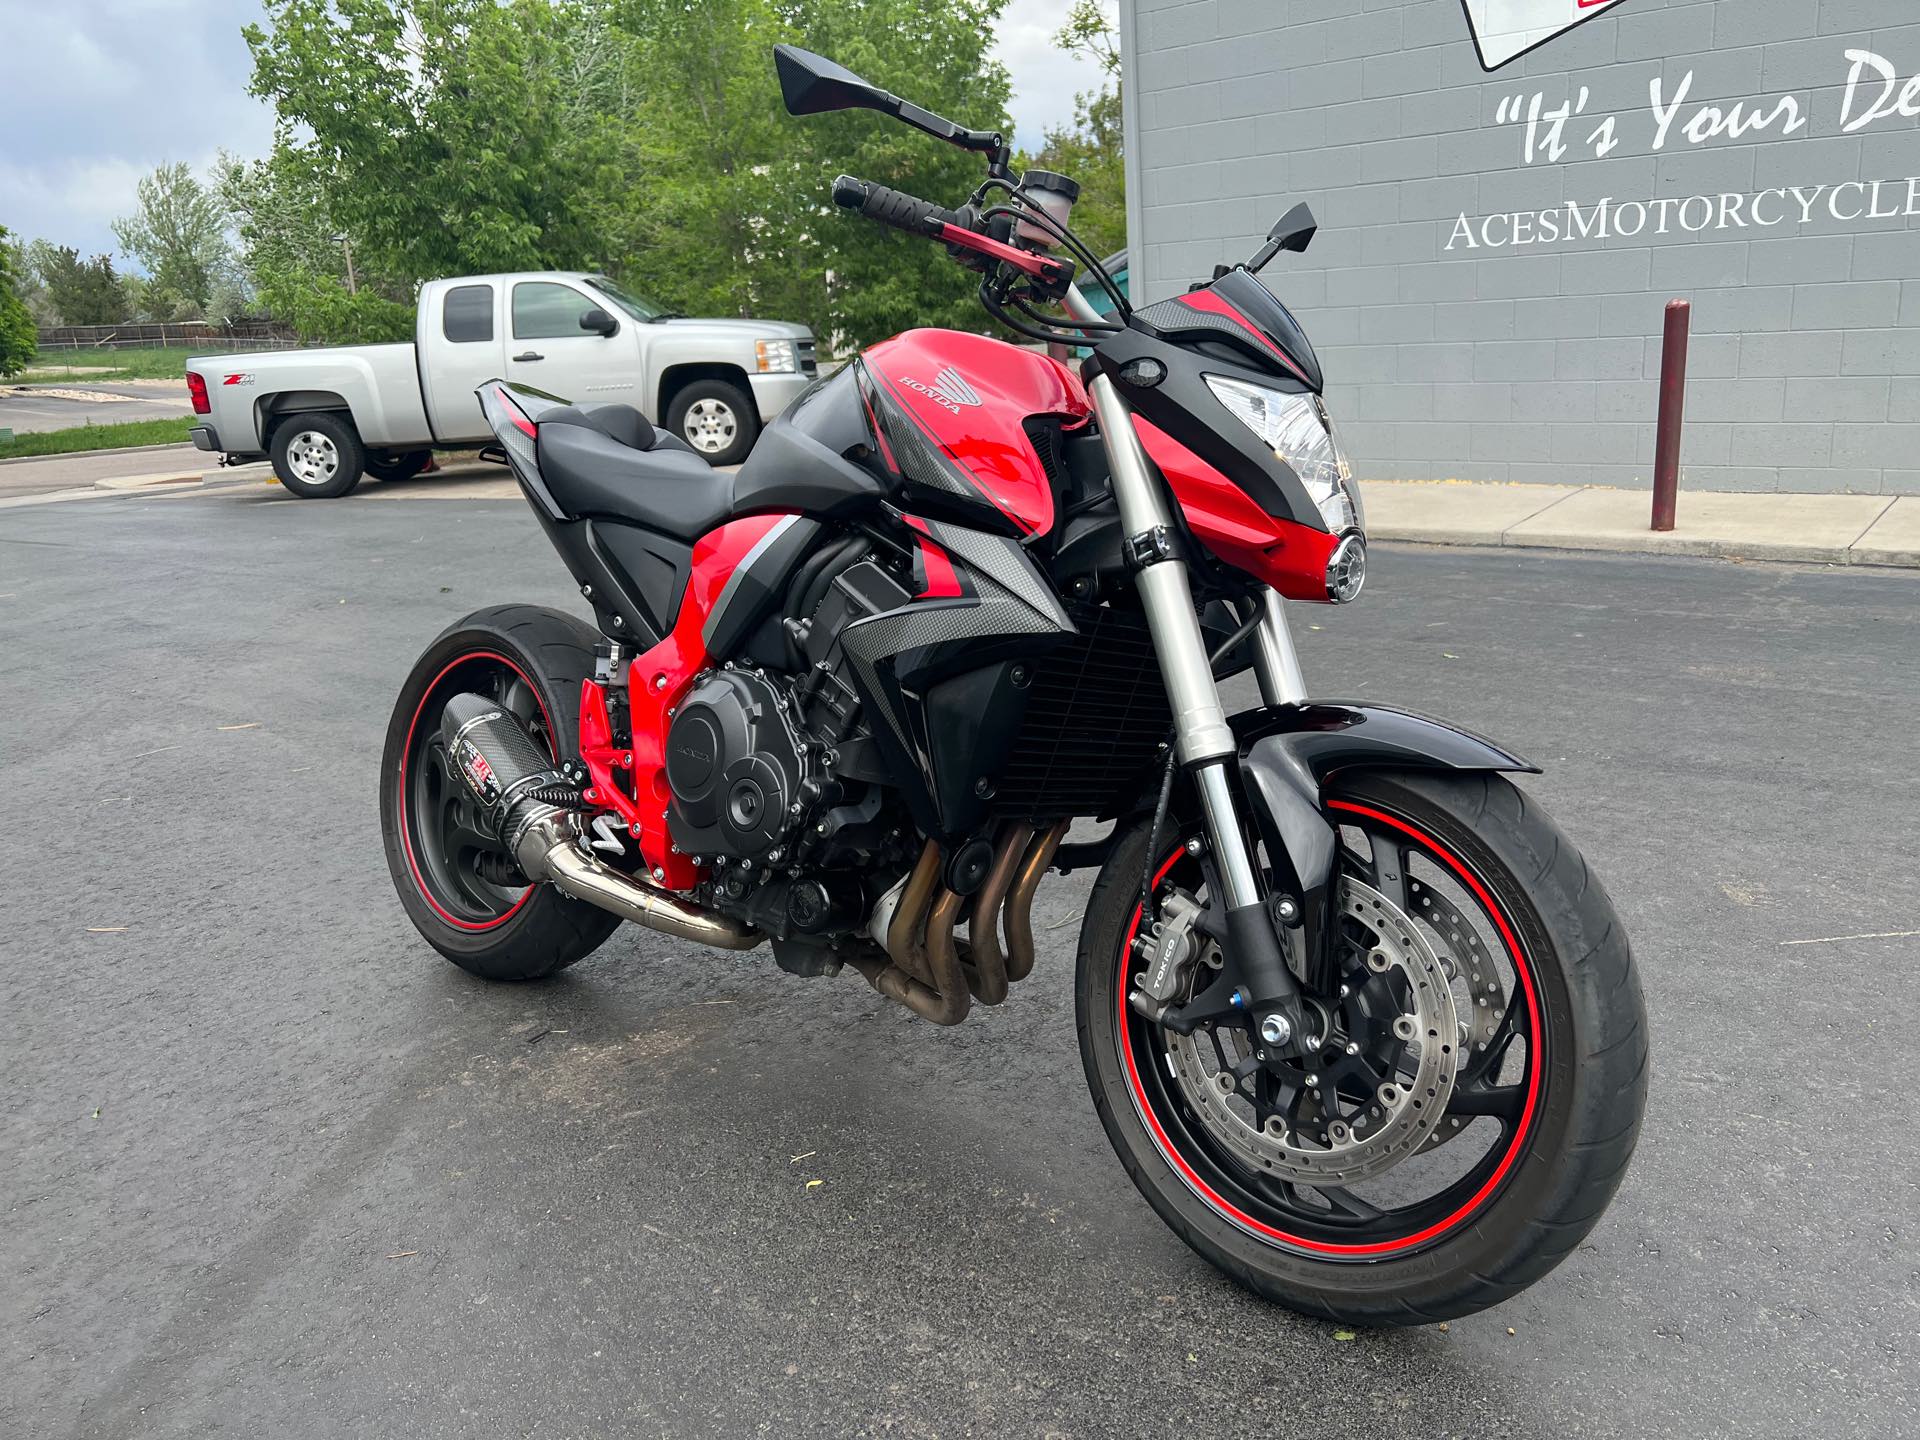 2015 Honda CB 1000R at Aces Motorcycles - Fort Collins